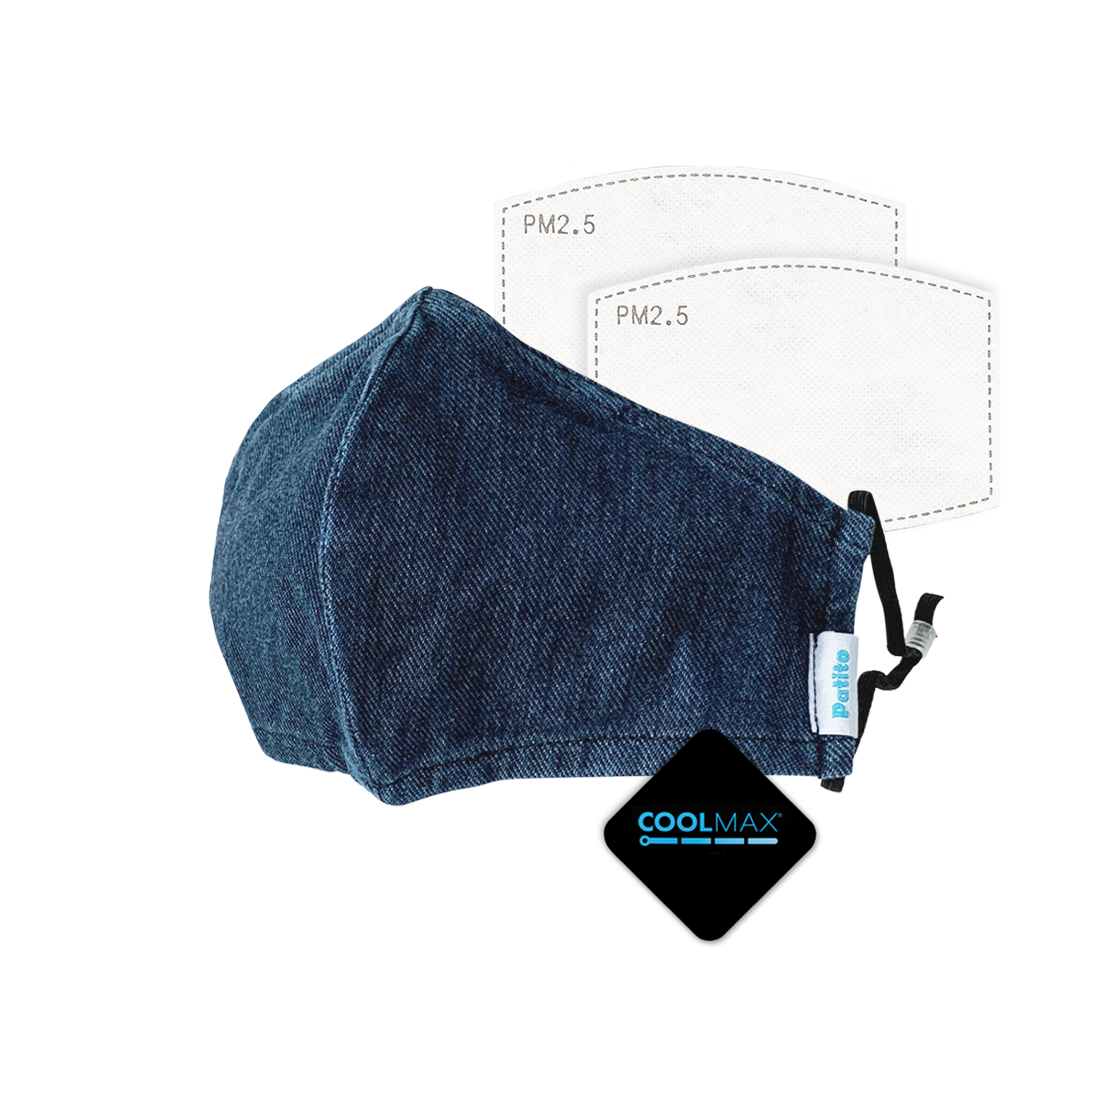 Extra Guard COOLMAX Silver Ions Double Layered Mask - Adult - Denim - EG3021 (Includes PM2.5 Filters x 2)